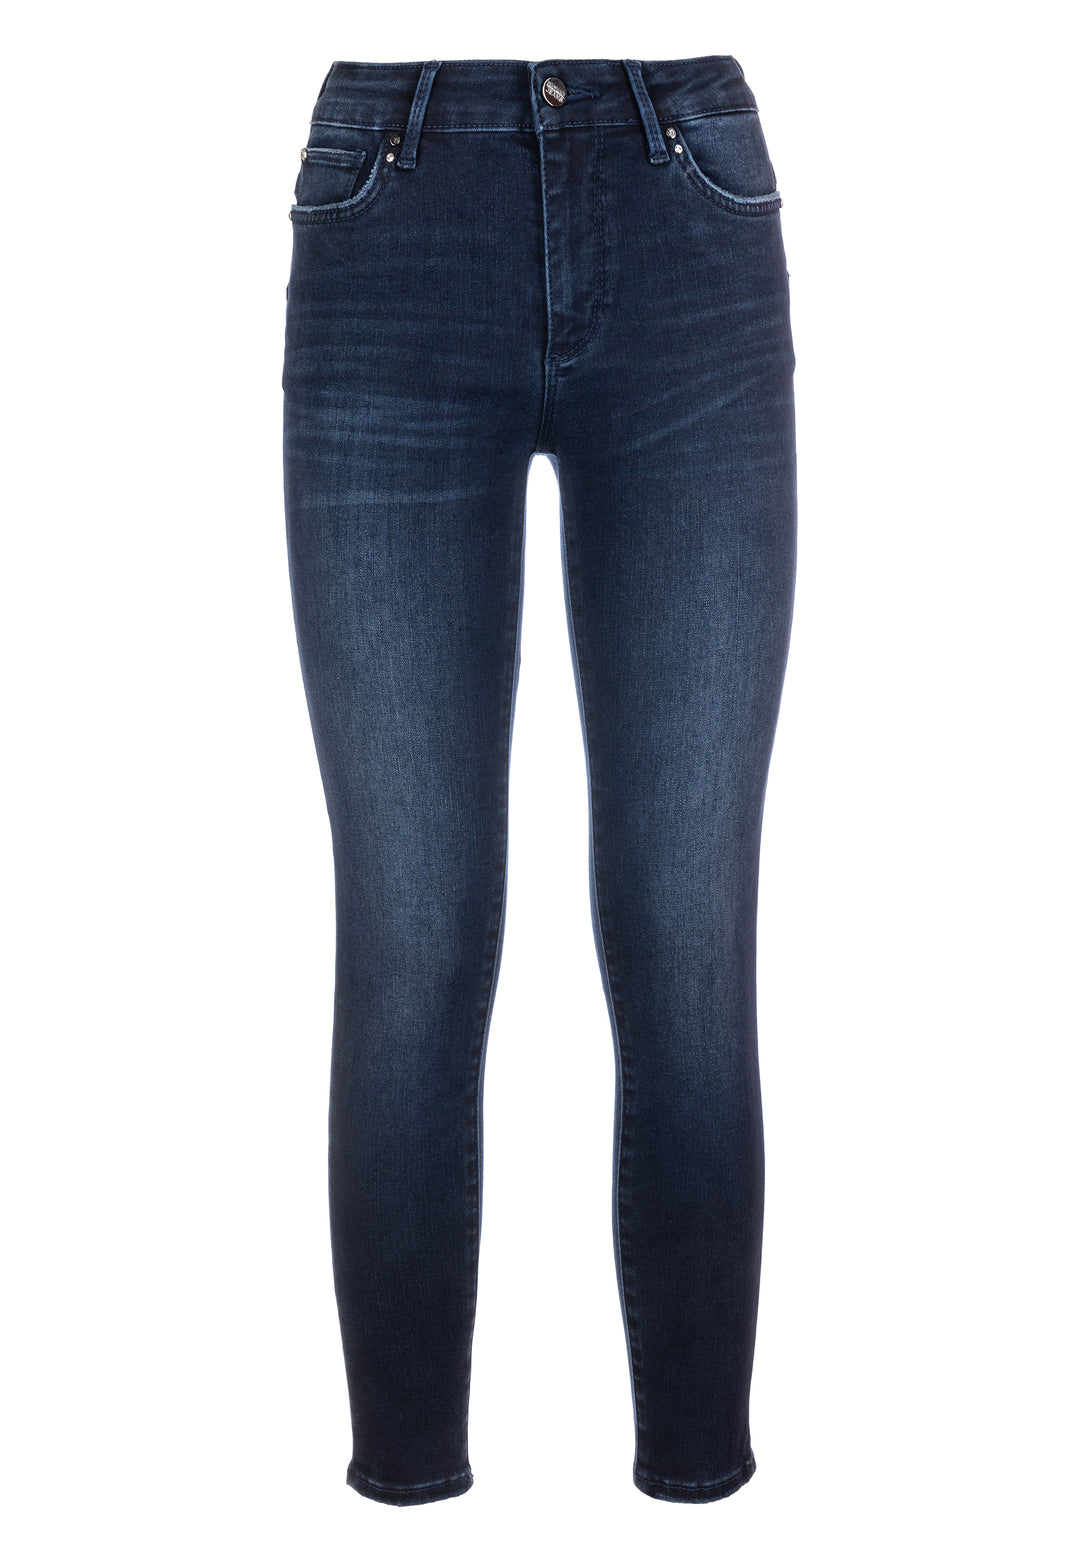 Jeans skinny fit with push up effect made in denim with dark wash